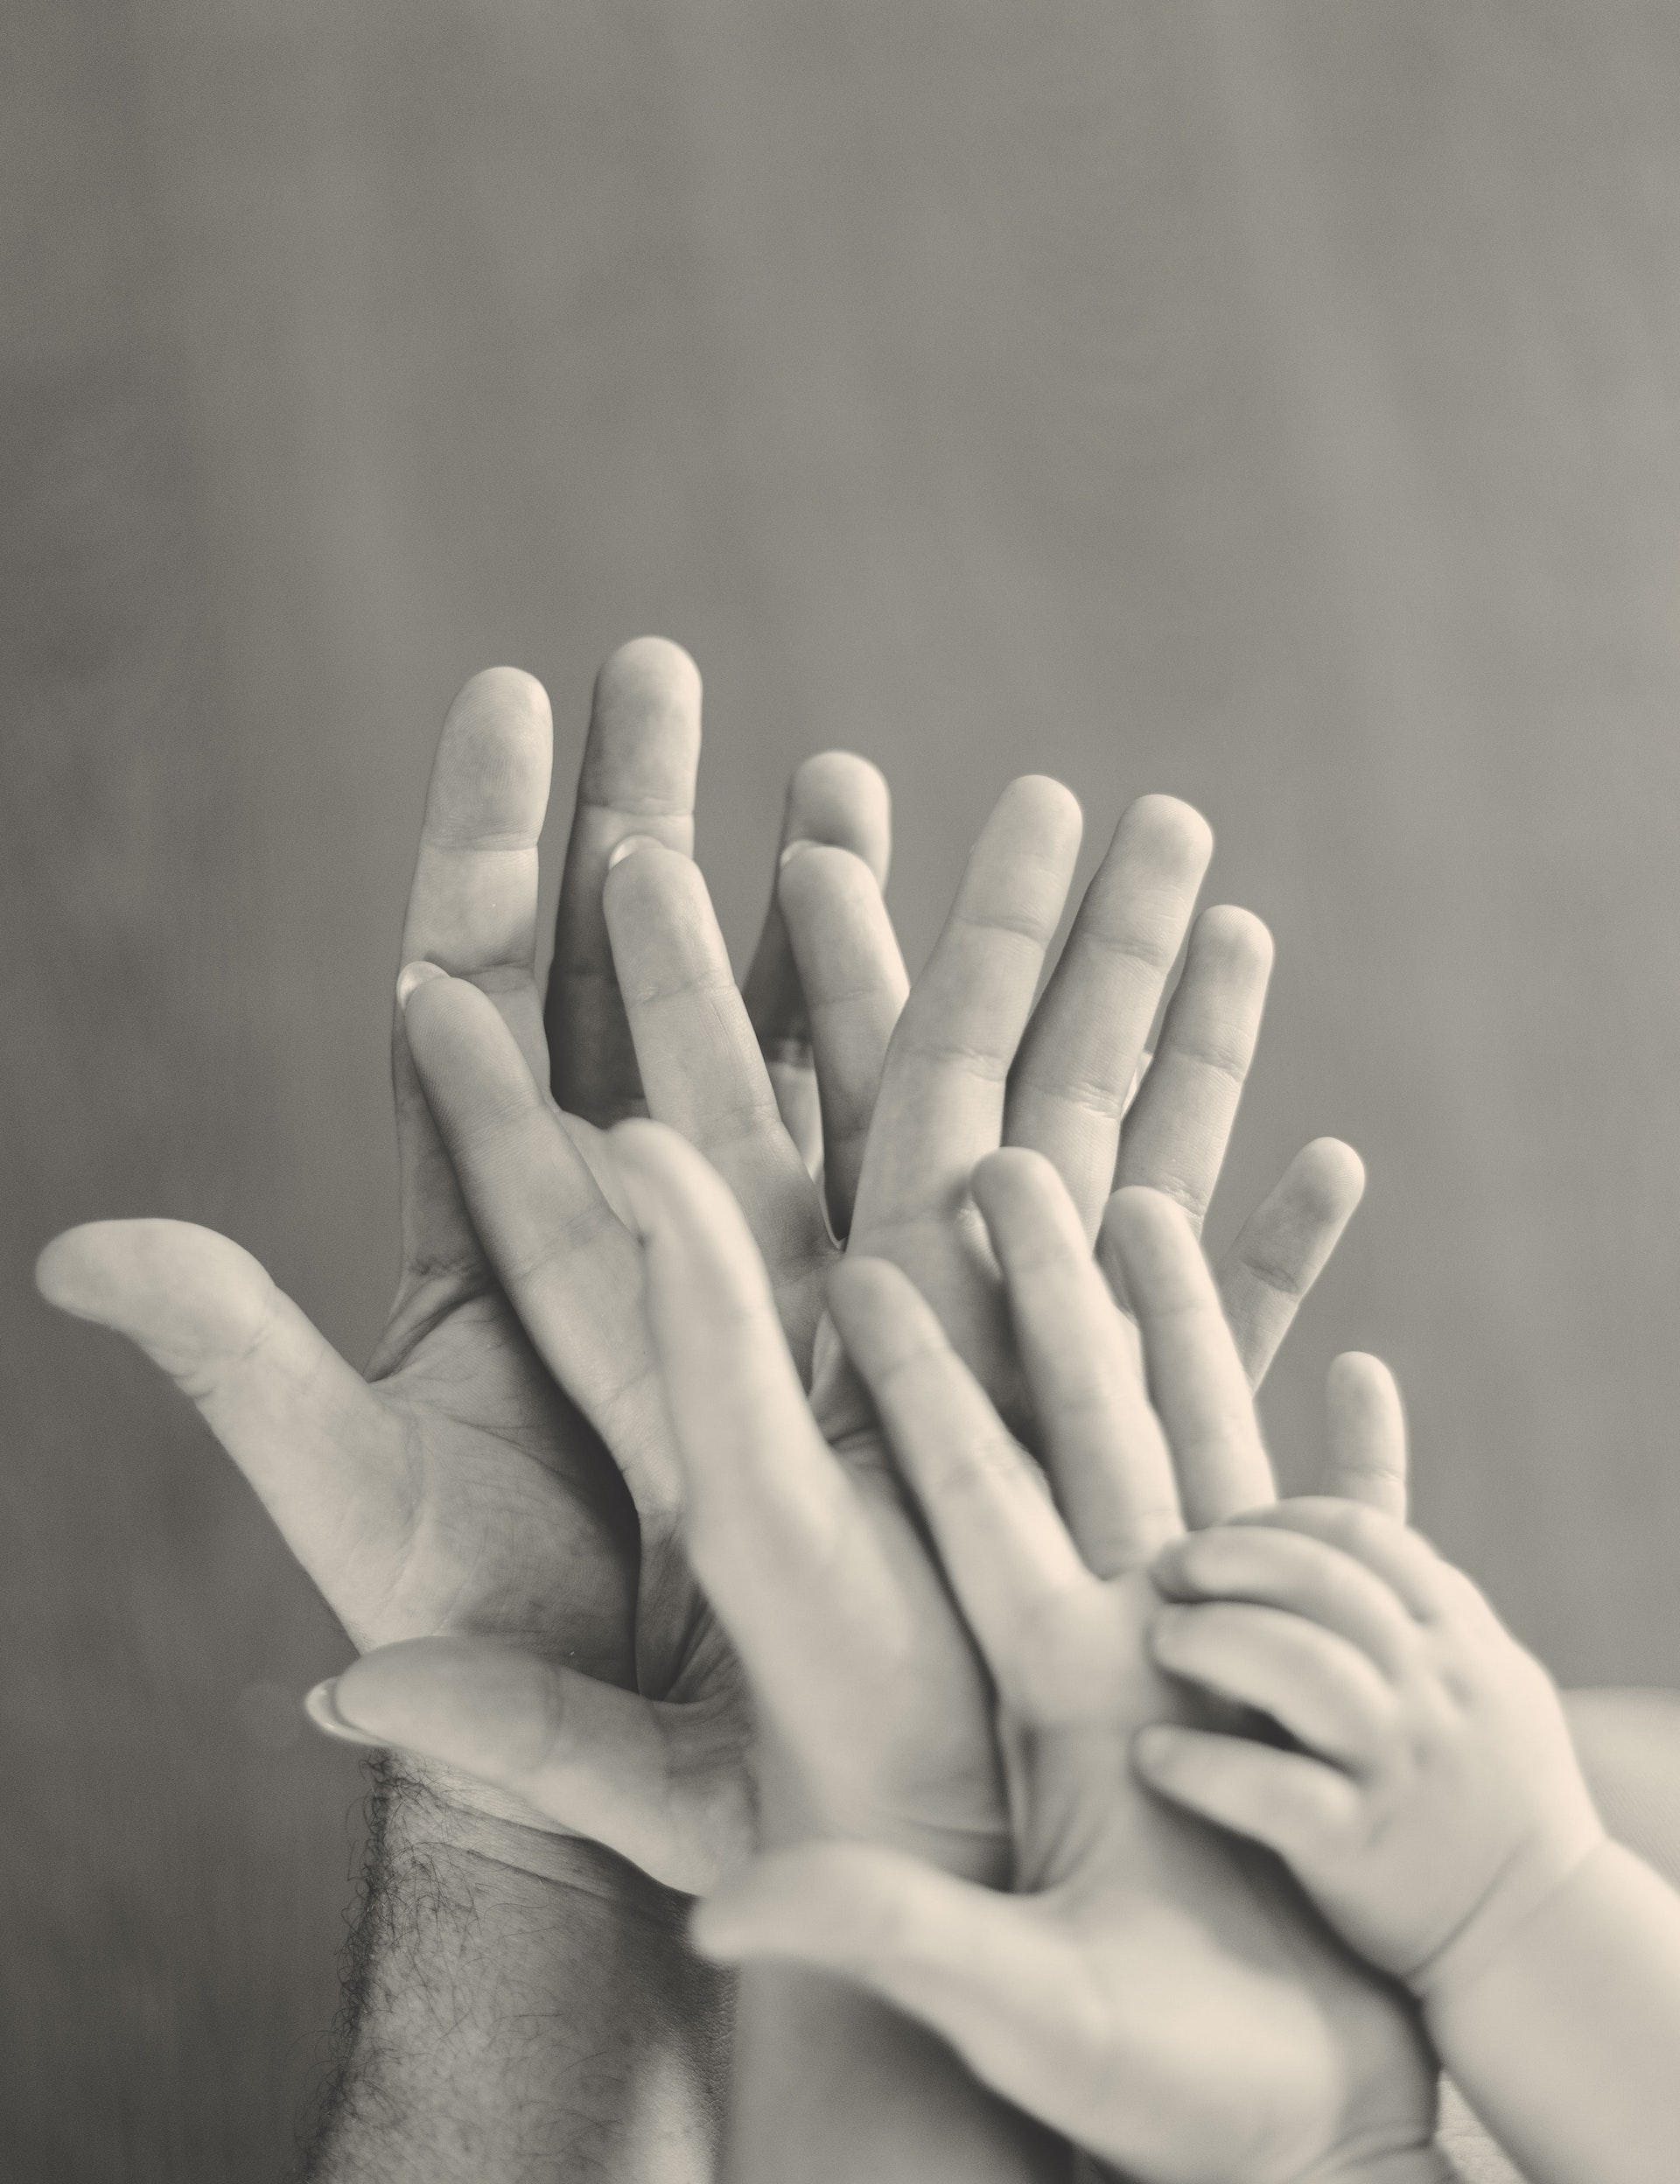 Childrens' and adults' hands, one in the other